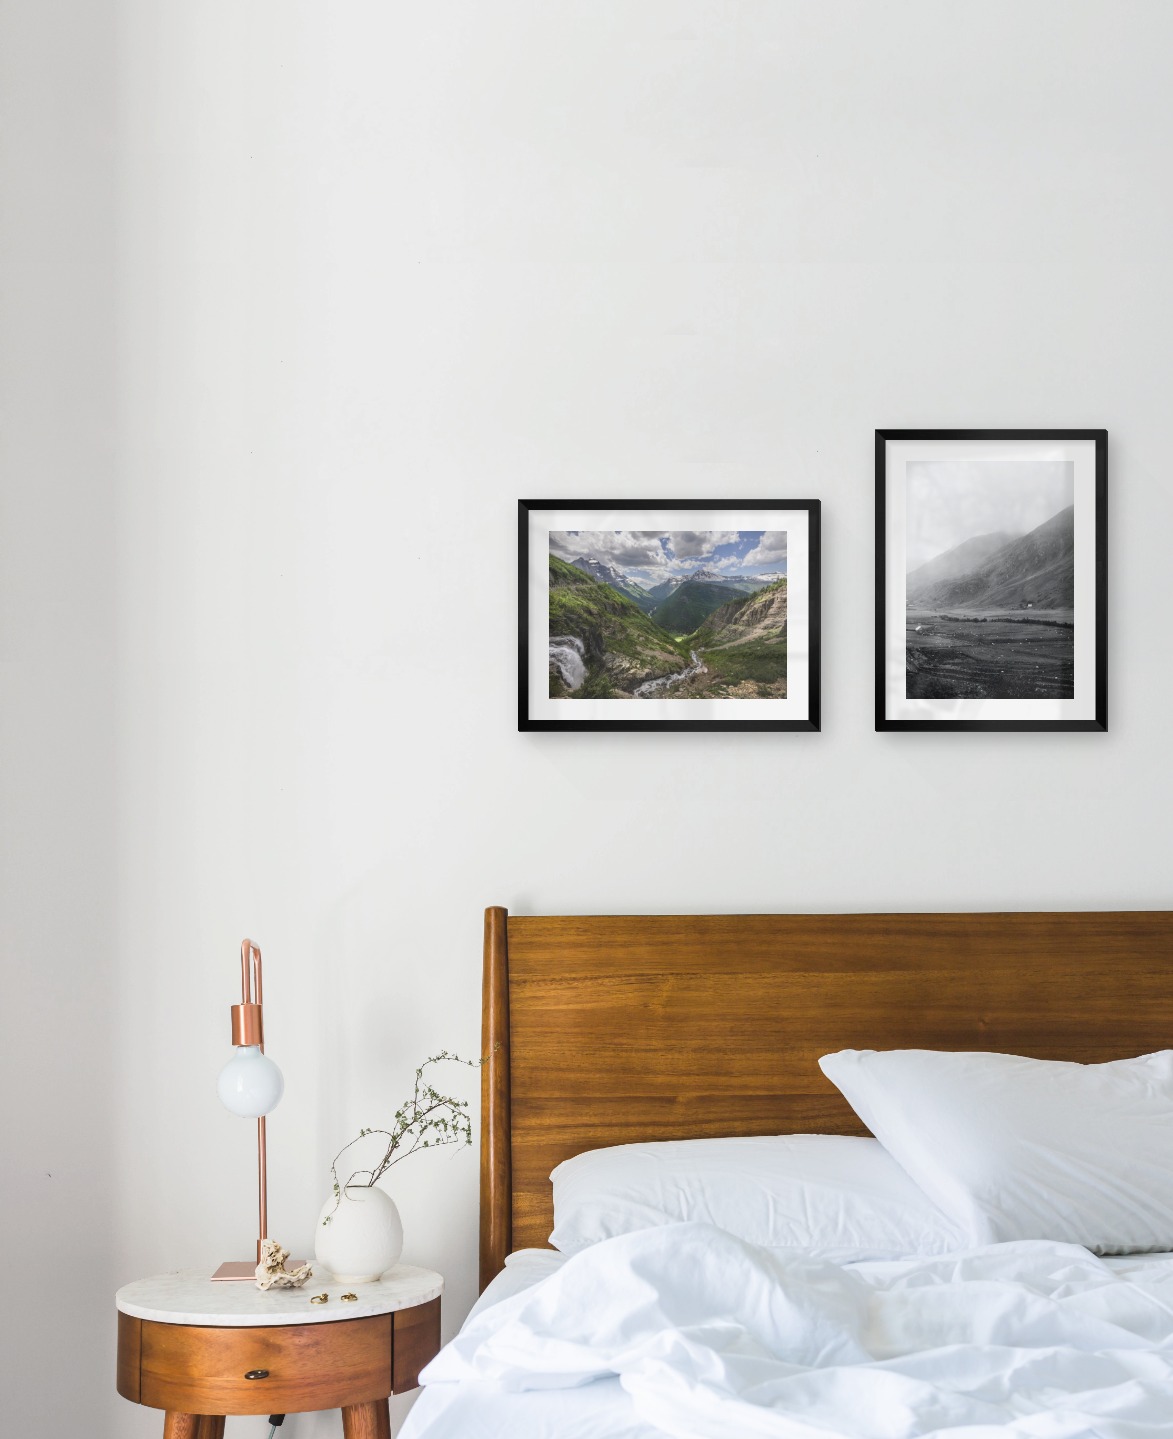 Gallery wall with picture frames in black in sizes 30x40 with prints "Bergsdal" and "Fields in front of mountains"